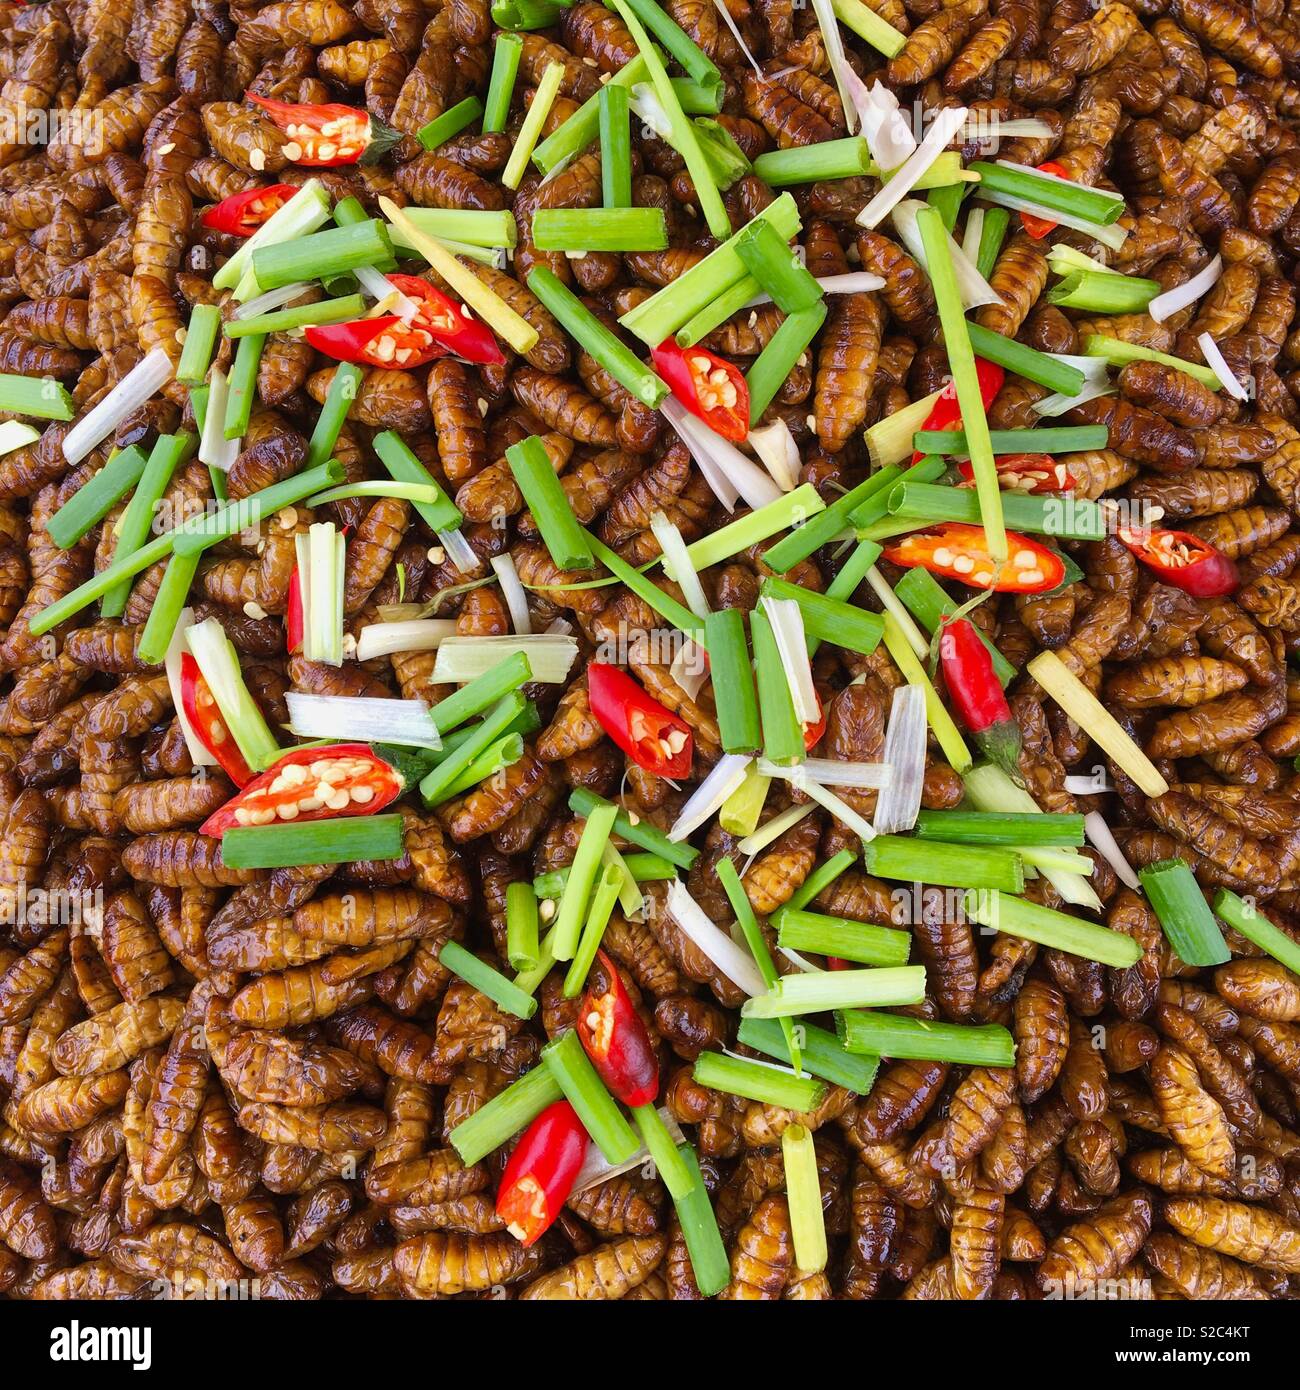 Edible silk worms for sale at food markets in Cambodia Stock Photo